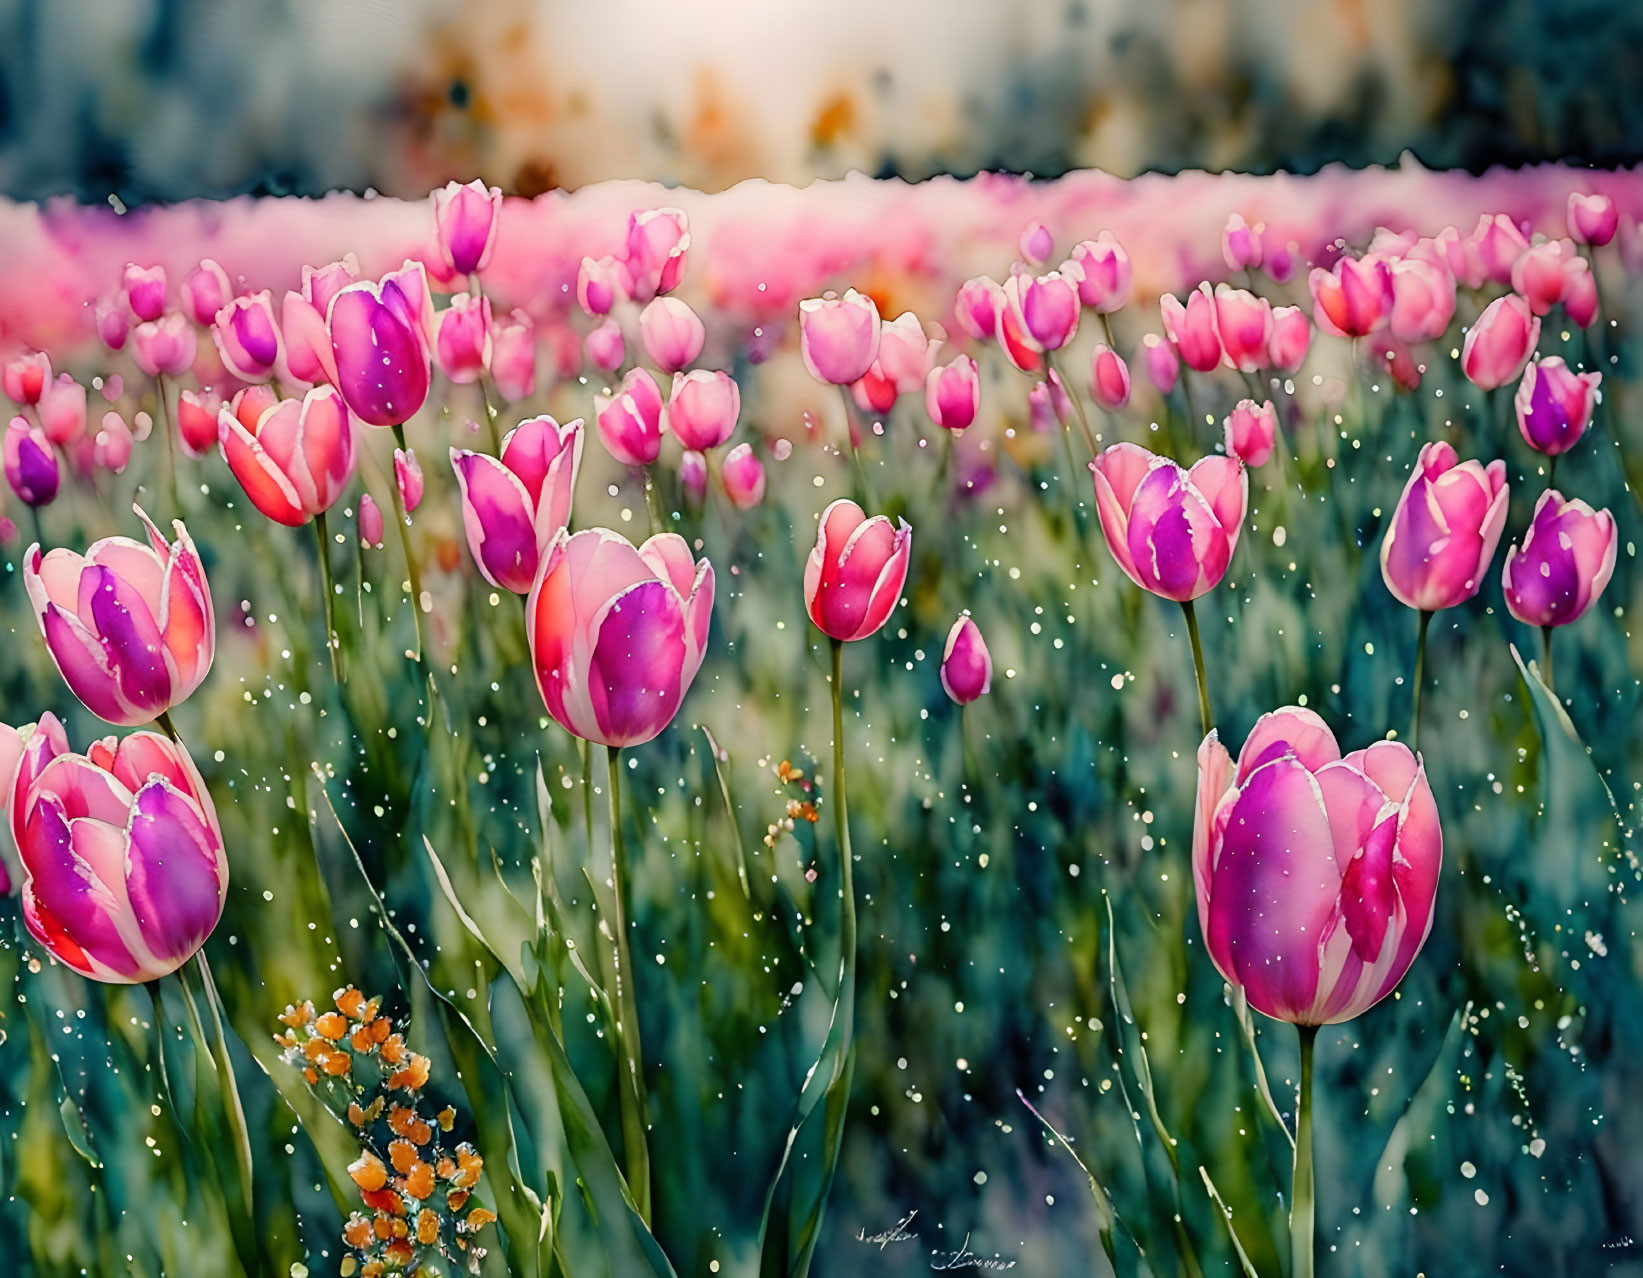 Pink tulips field with dew drops under soft hazy sky at dawn or dusk